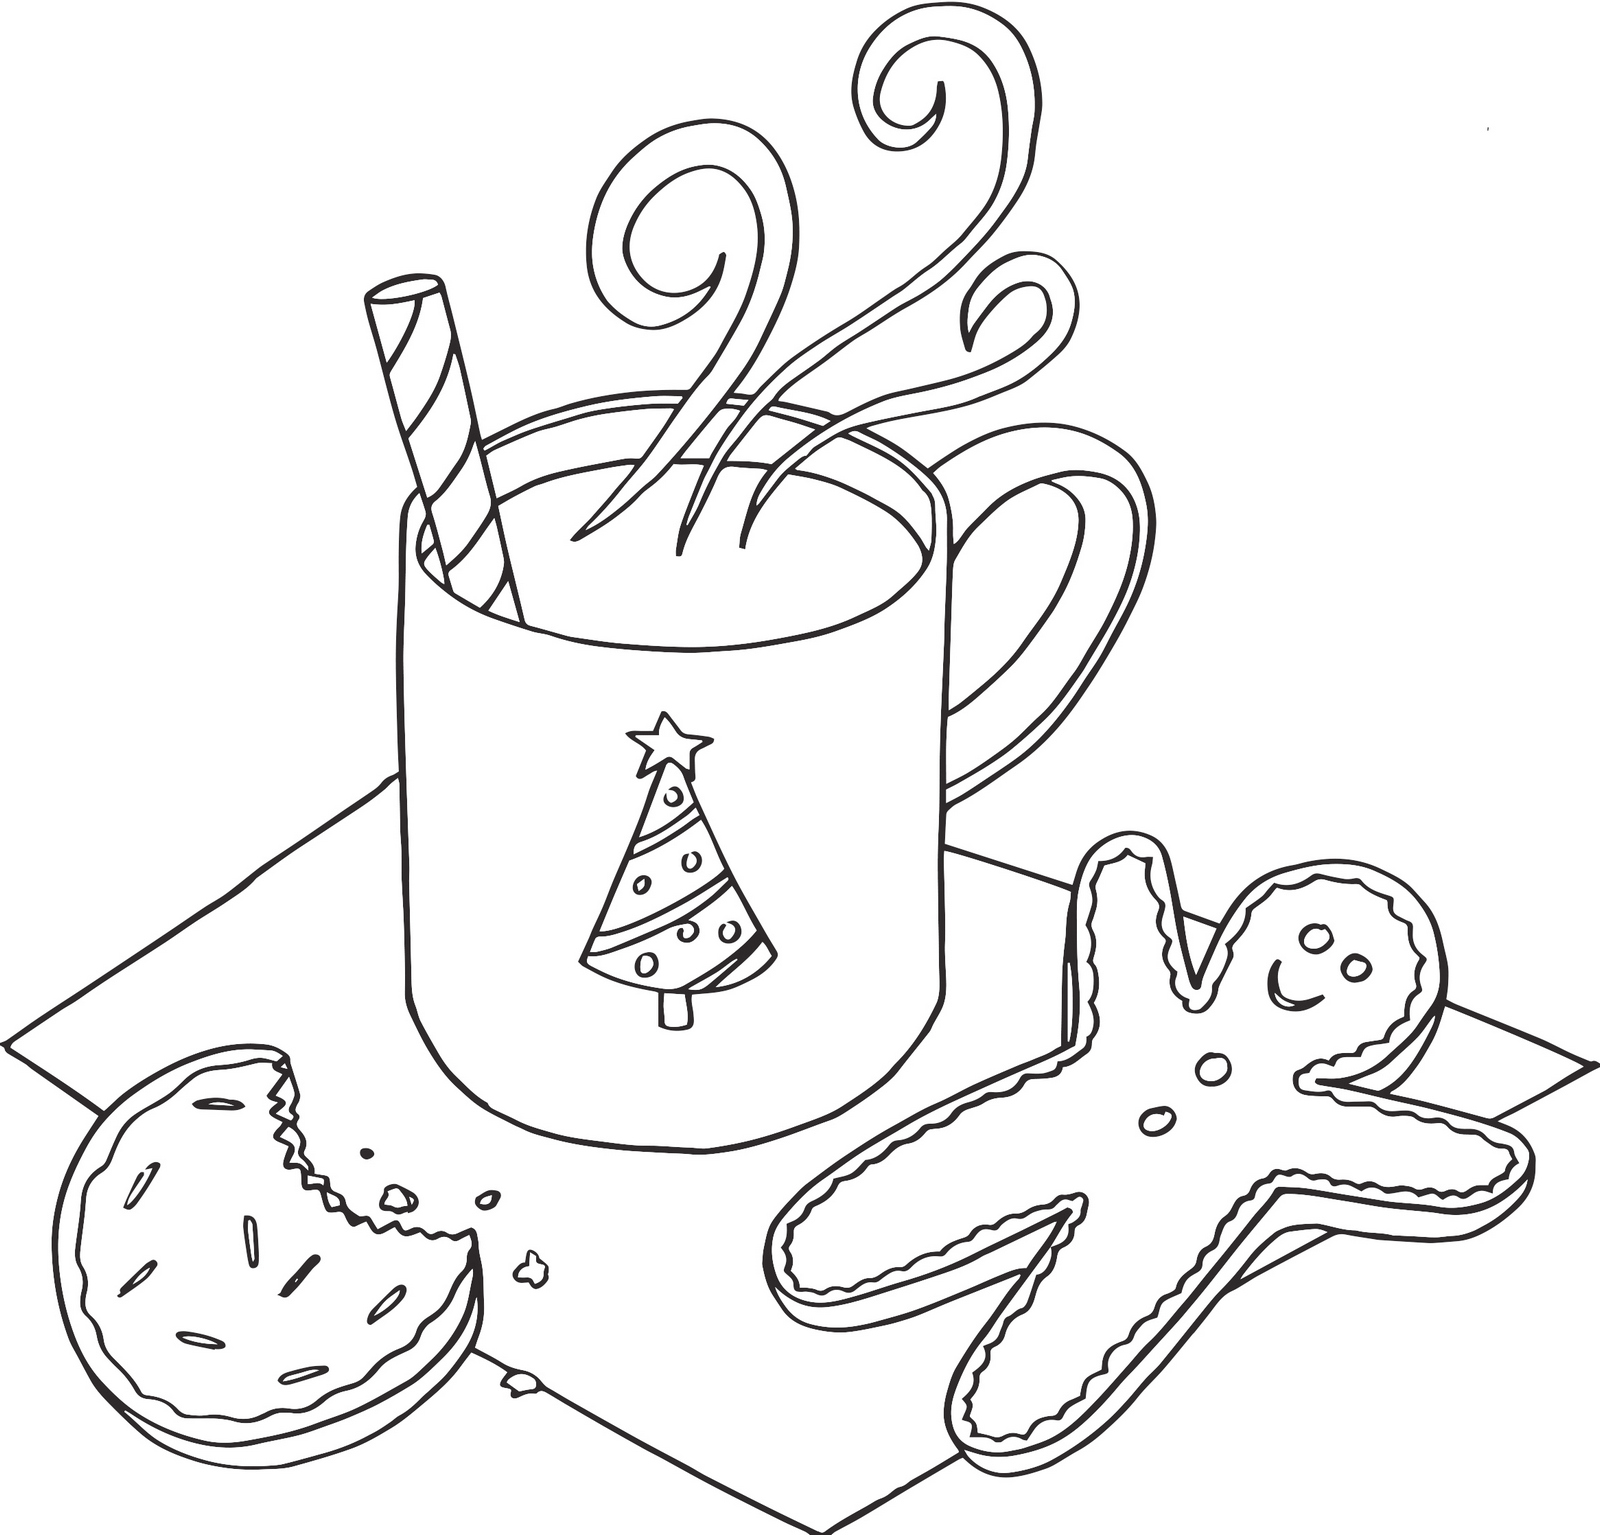 Rich Cup of Hot Chocolate Coloring Page Designs - Coloring Pages